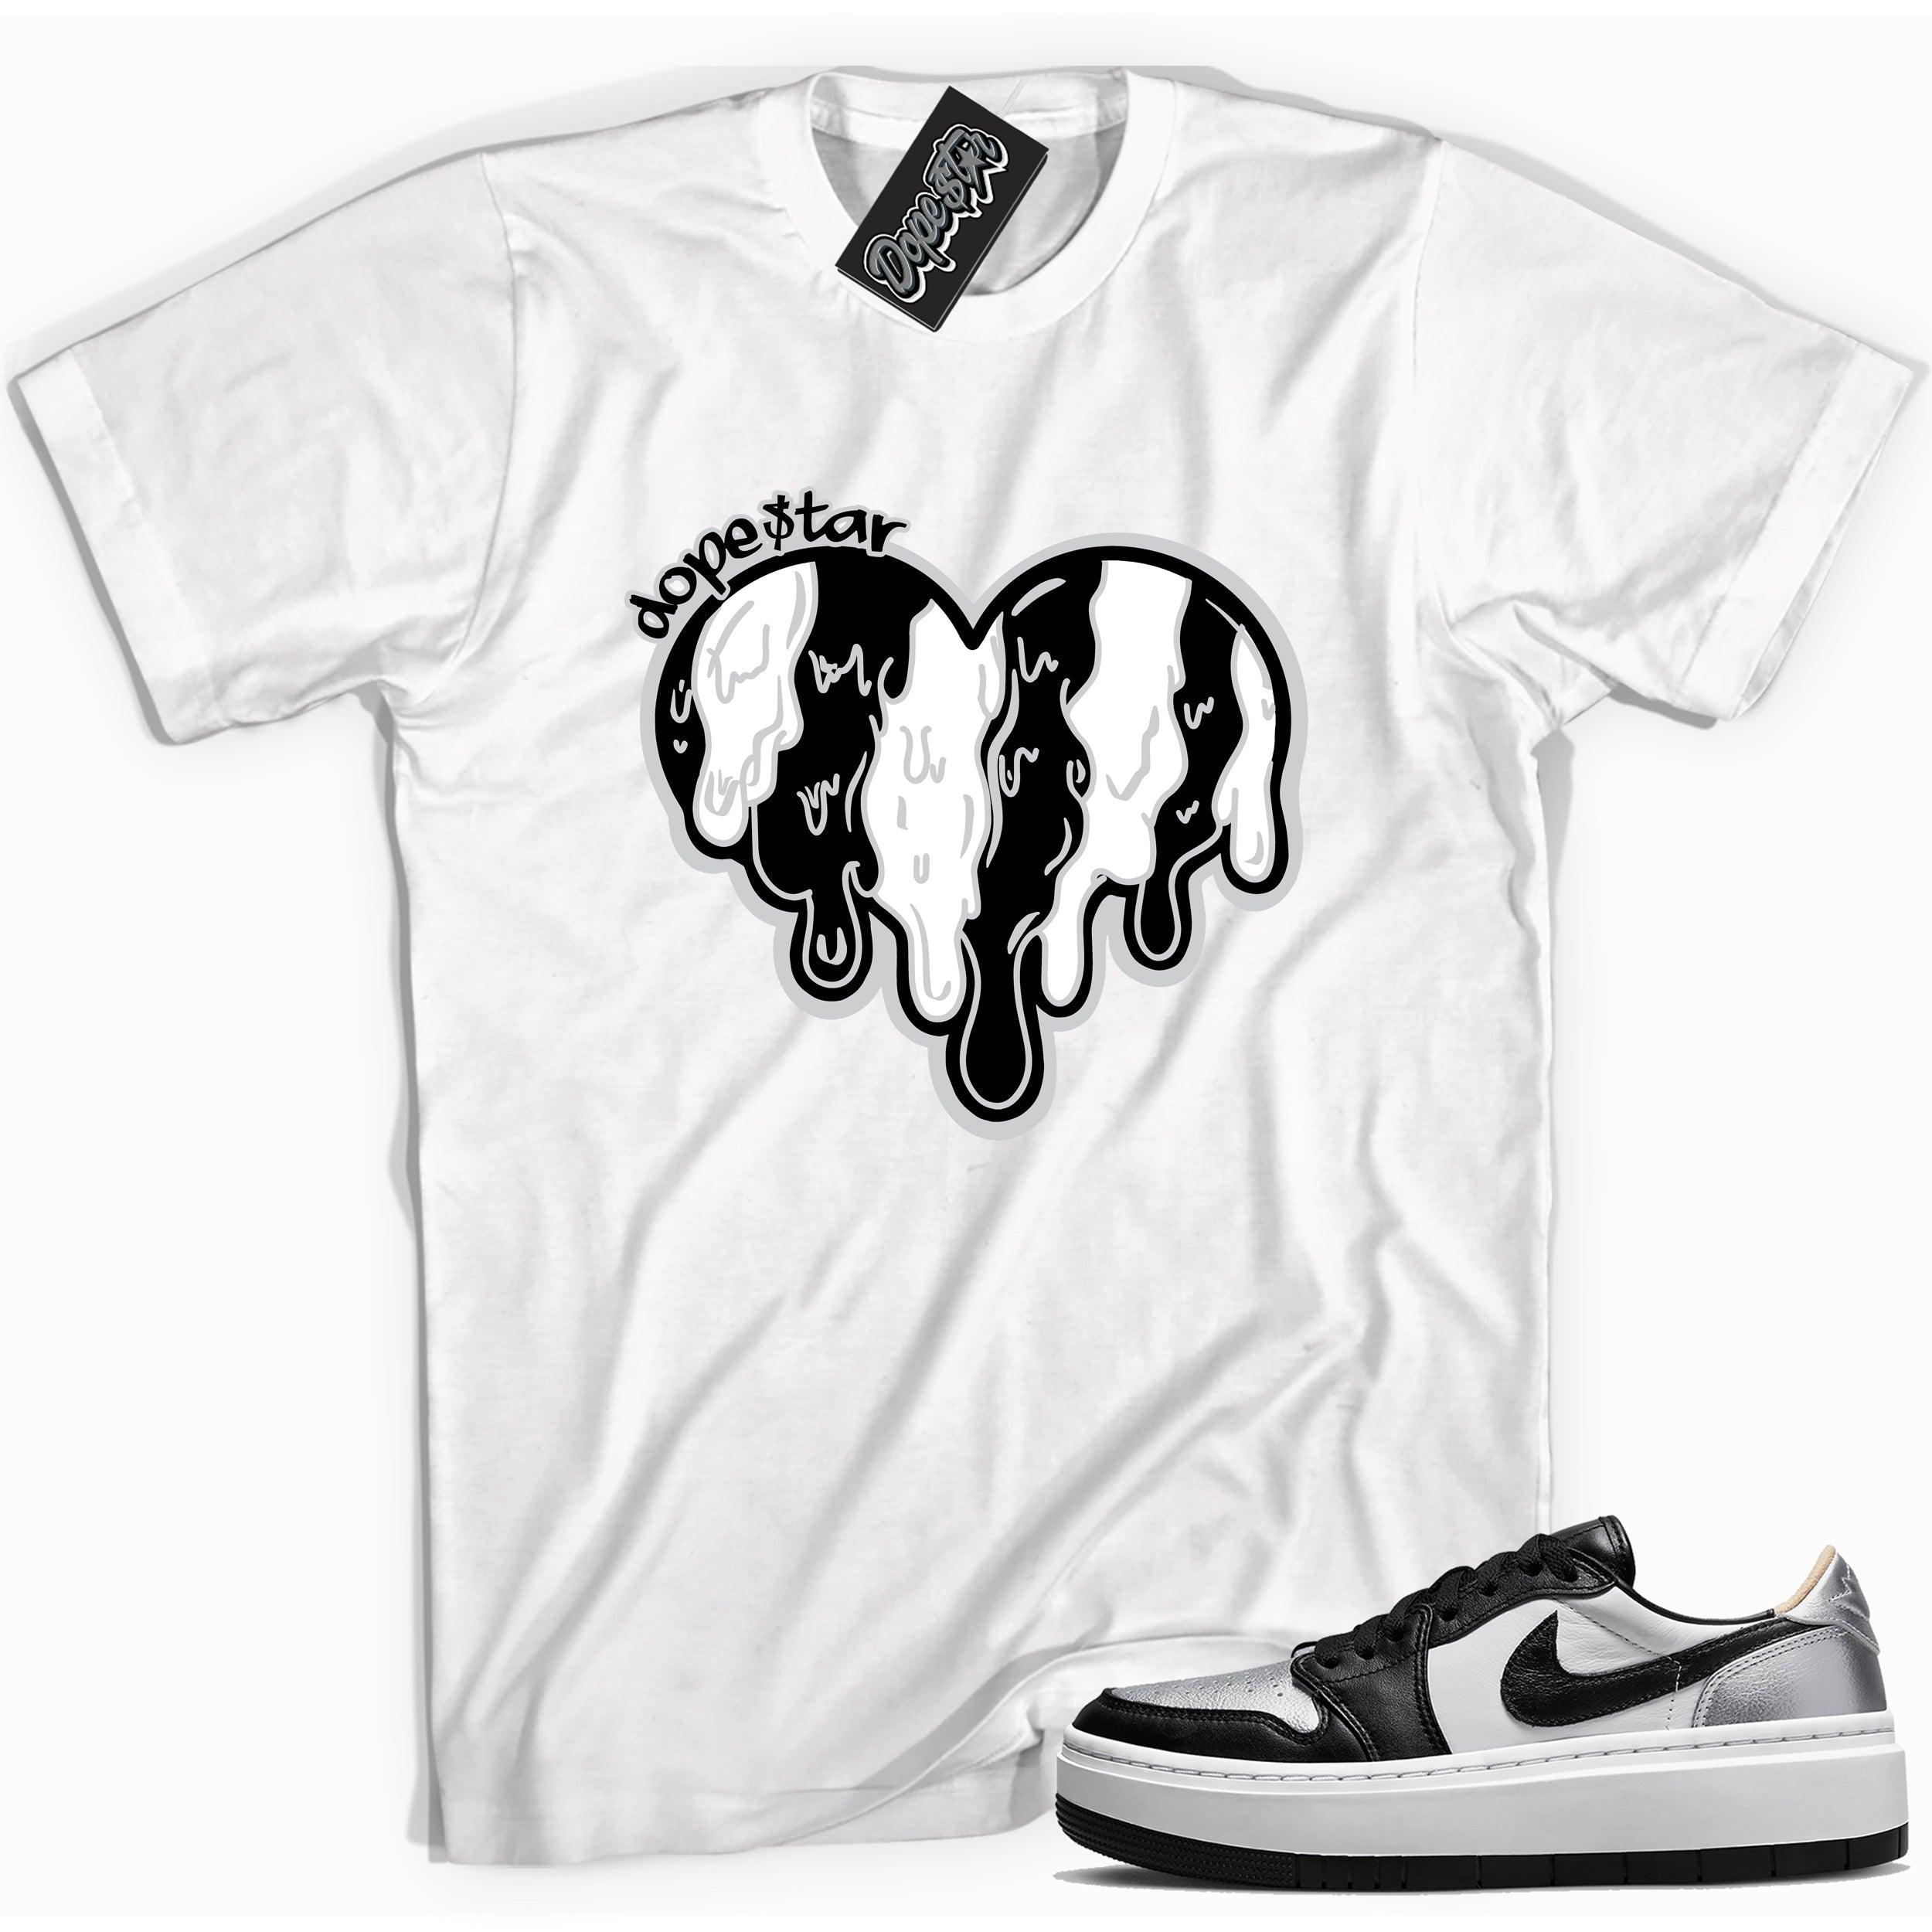 Cool white graphic tee with 'melting heart' print, that perfectly matches Air Jordan 1 Elevate Low SE Silver Toe sneakers.